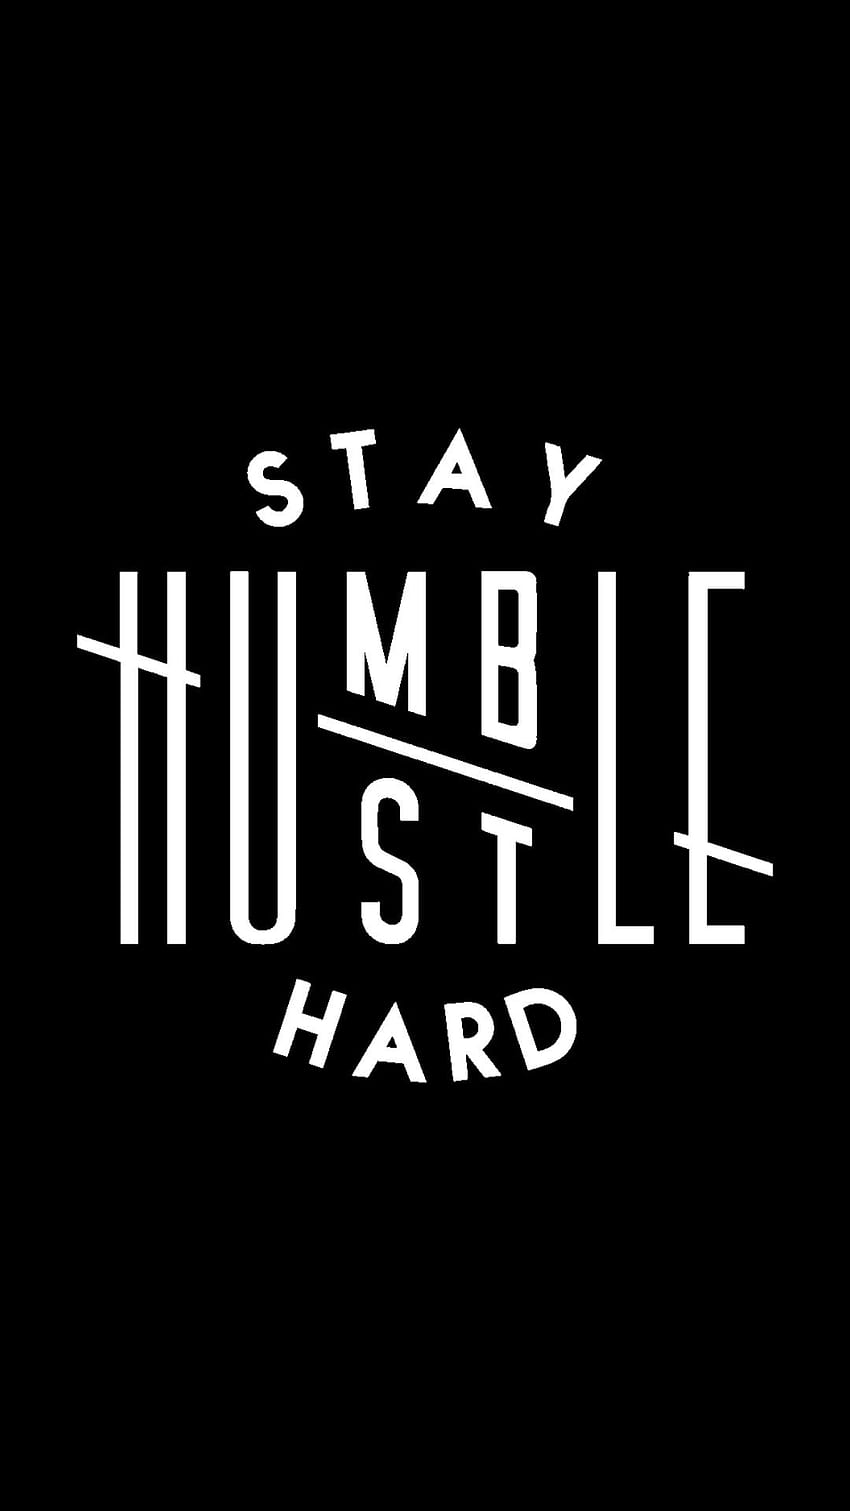 Stay Humble Hustle Hard. Stay humble hustle hard, Funny quote prints, Stay humble quotes, American Hustle HD phone wallpaper